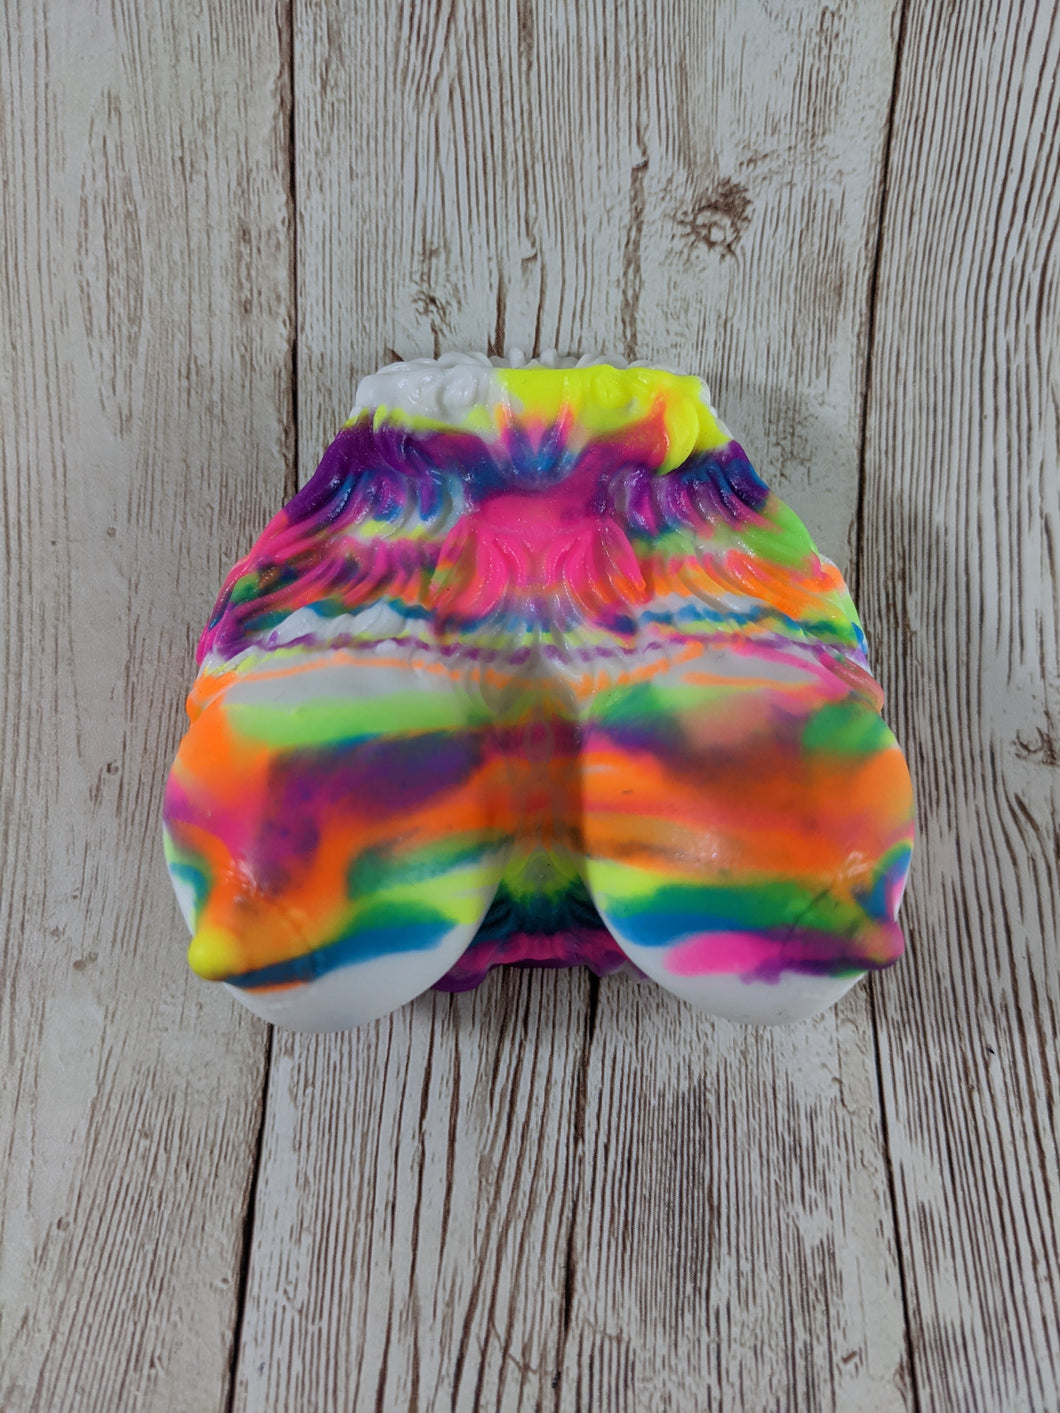 Stella the Moonwalker's Chest, Size Mini (Soft Firmness) Rainbow Birthday Cake Special Coloration